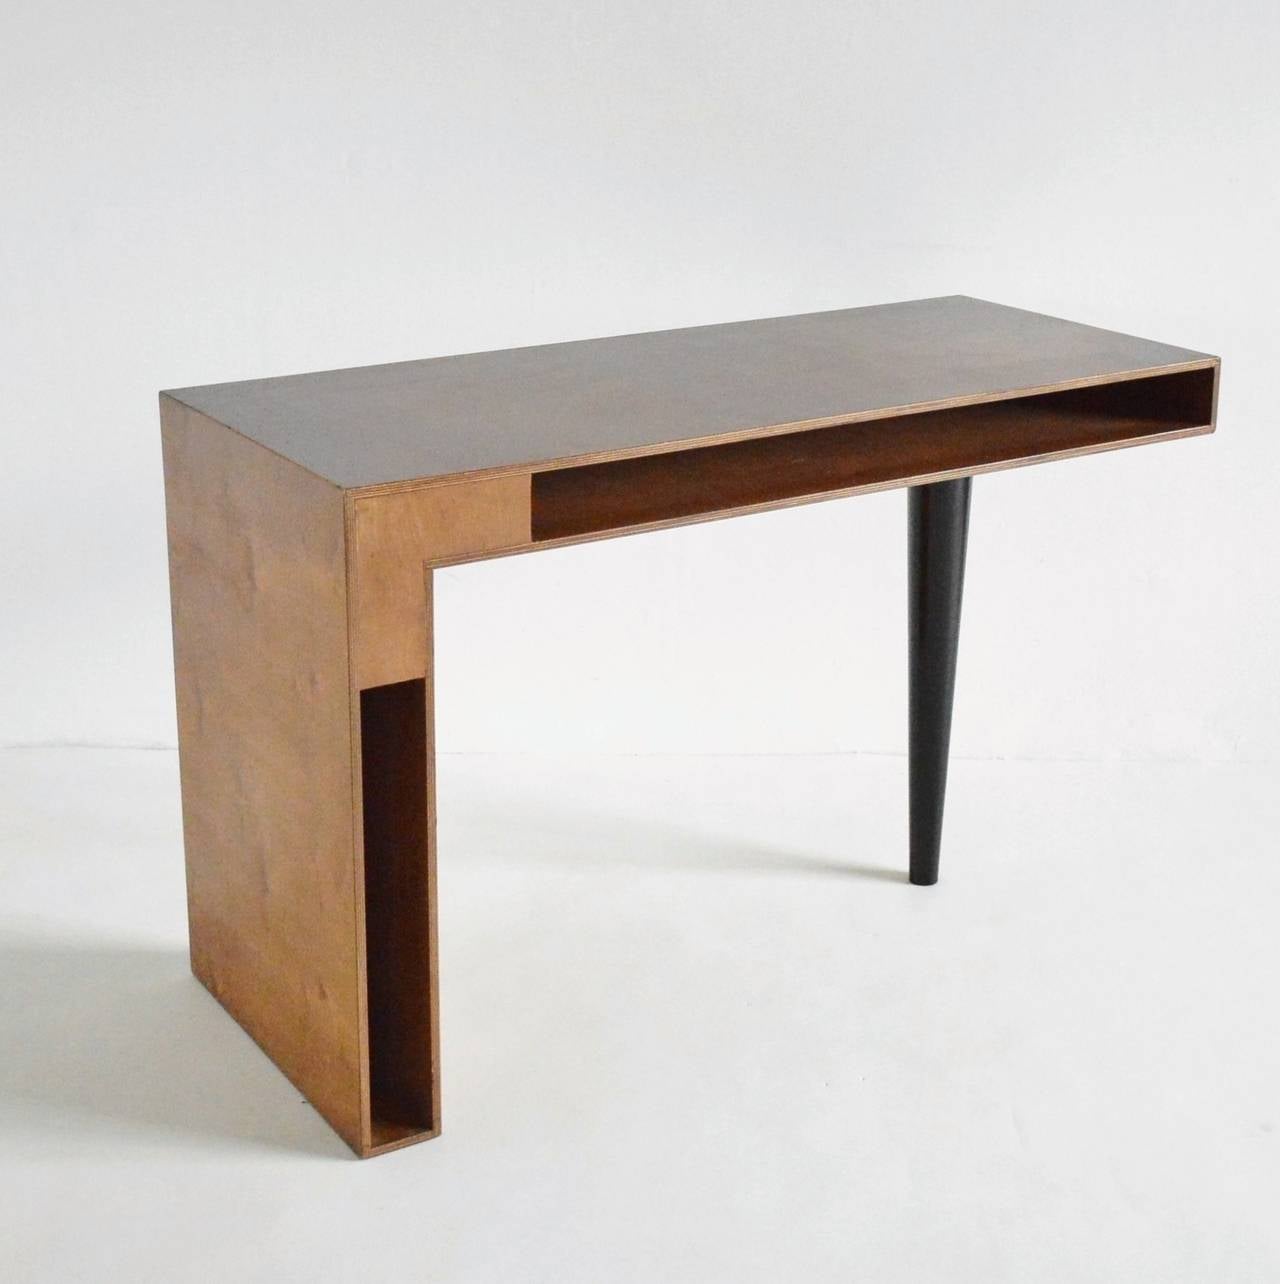 A one off prototype designed by relatively unknown Belgian artist Patrick Hoedt in the 1960s. Constructed from a dark plywood and turned and lacquered beech. The piece has been sensitively restored, a unique statement piece. The piece was designed